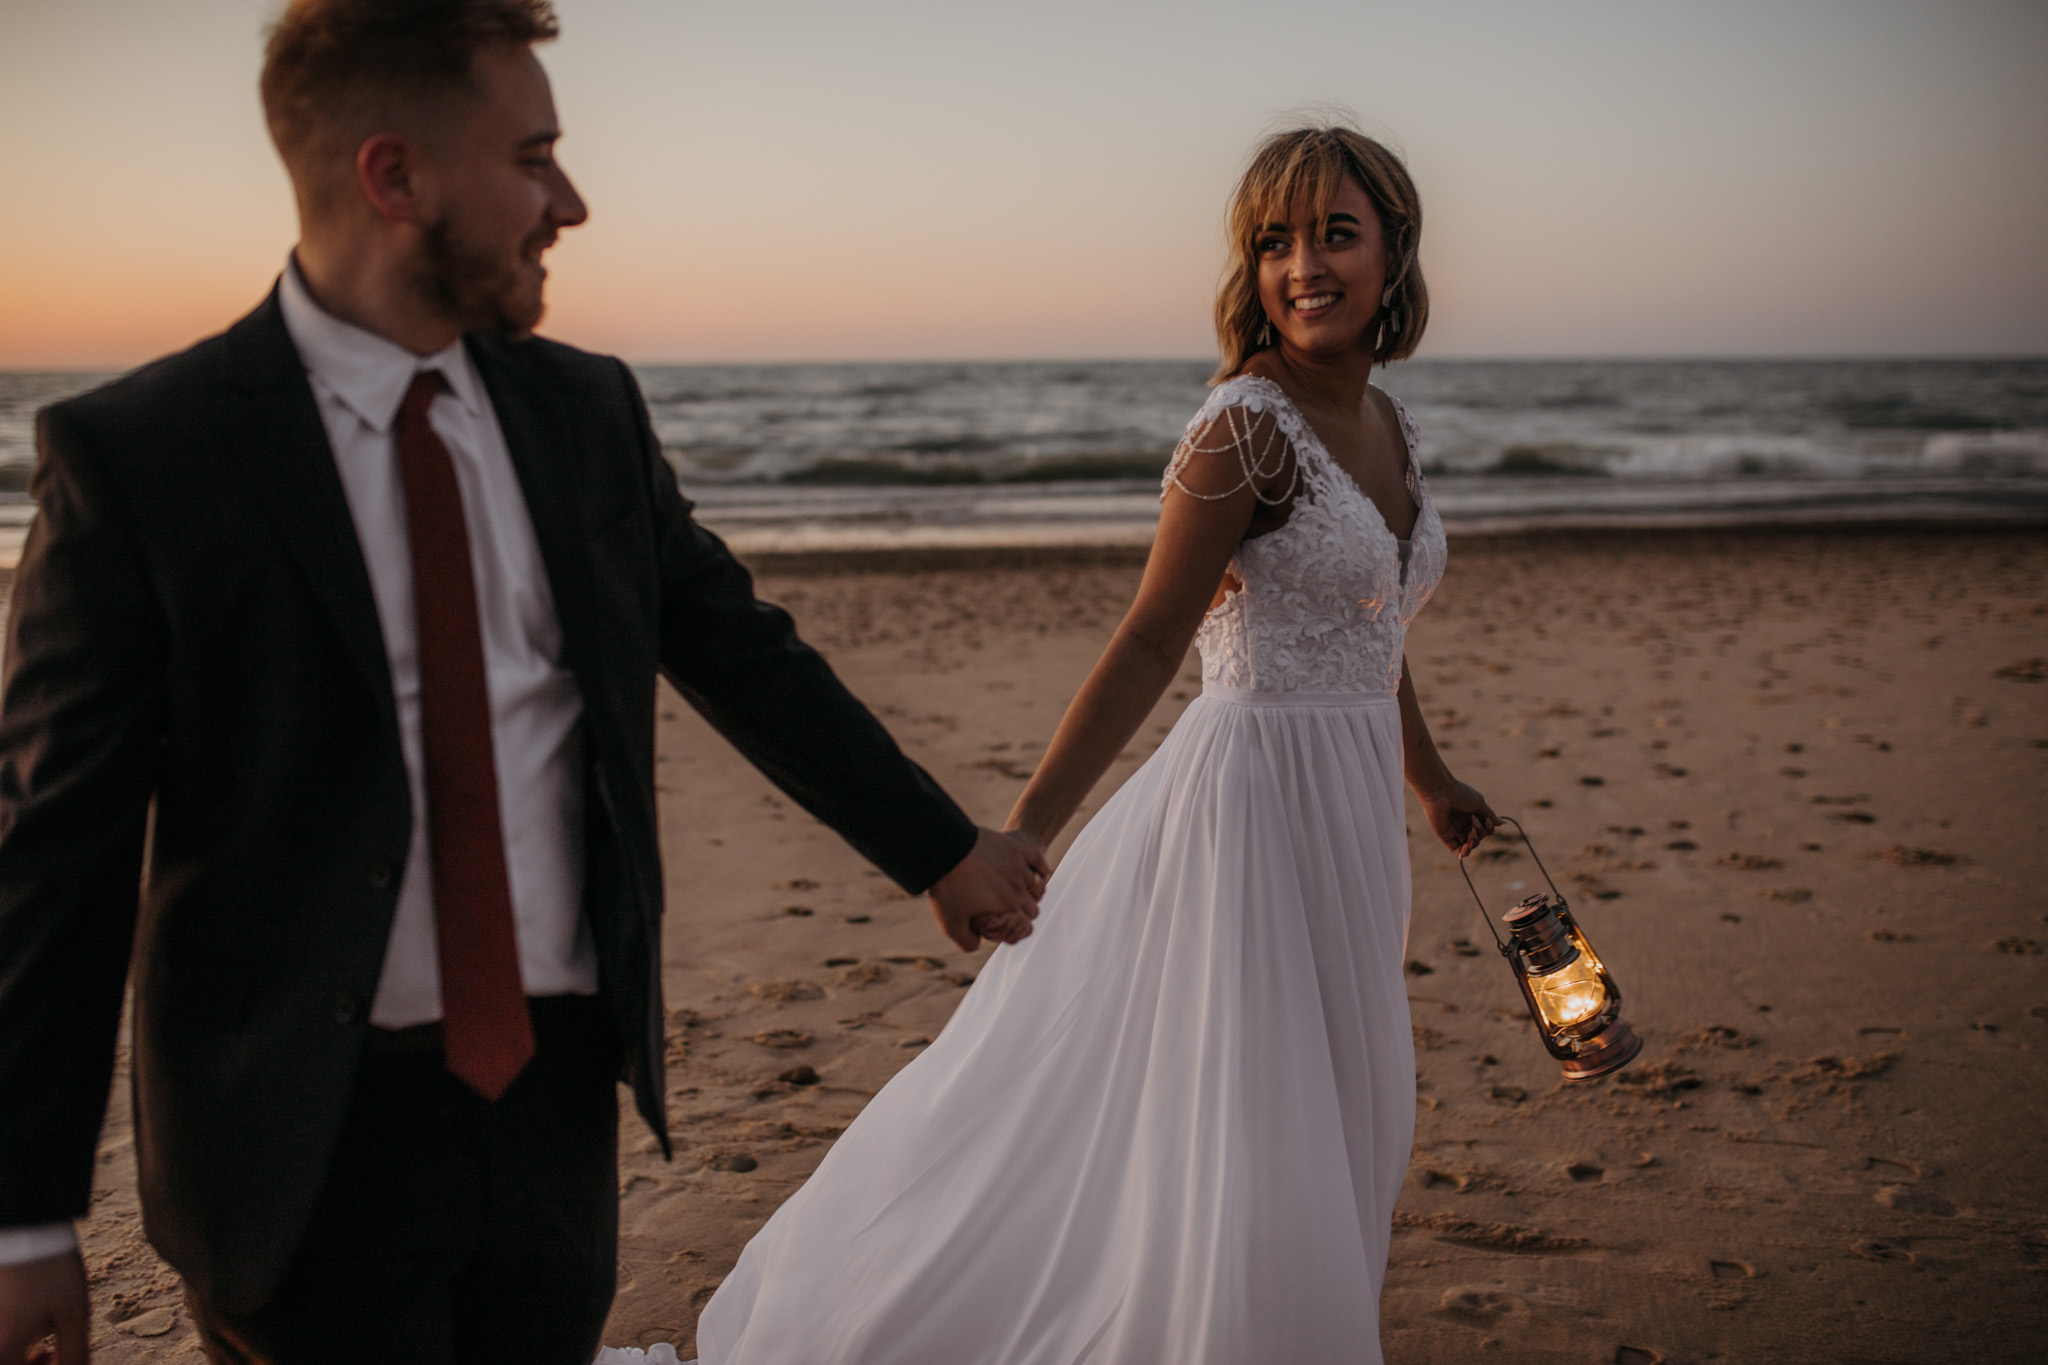 Sweet elopement portraits with lanterns